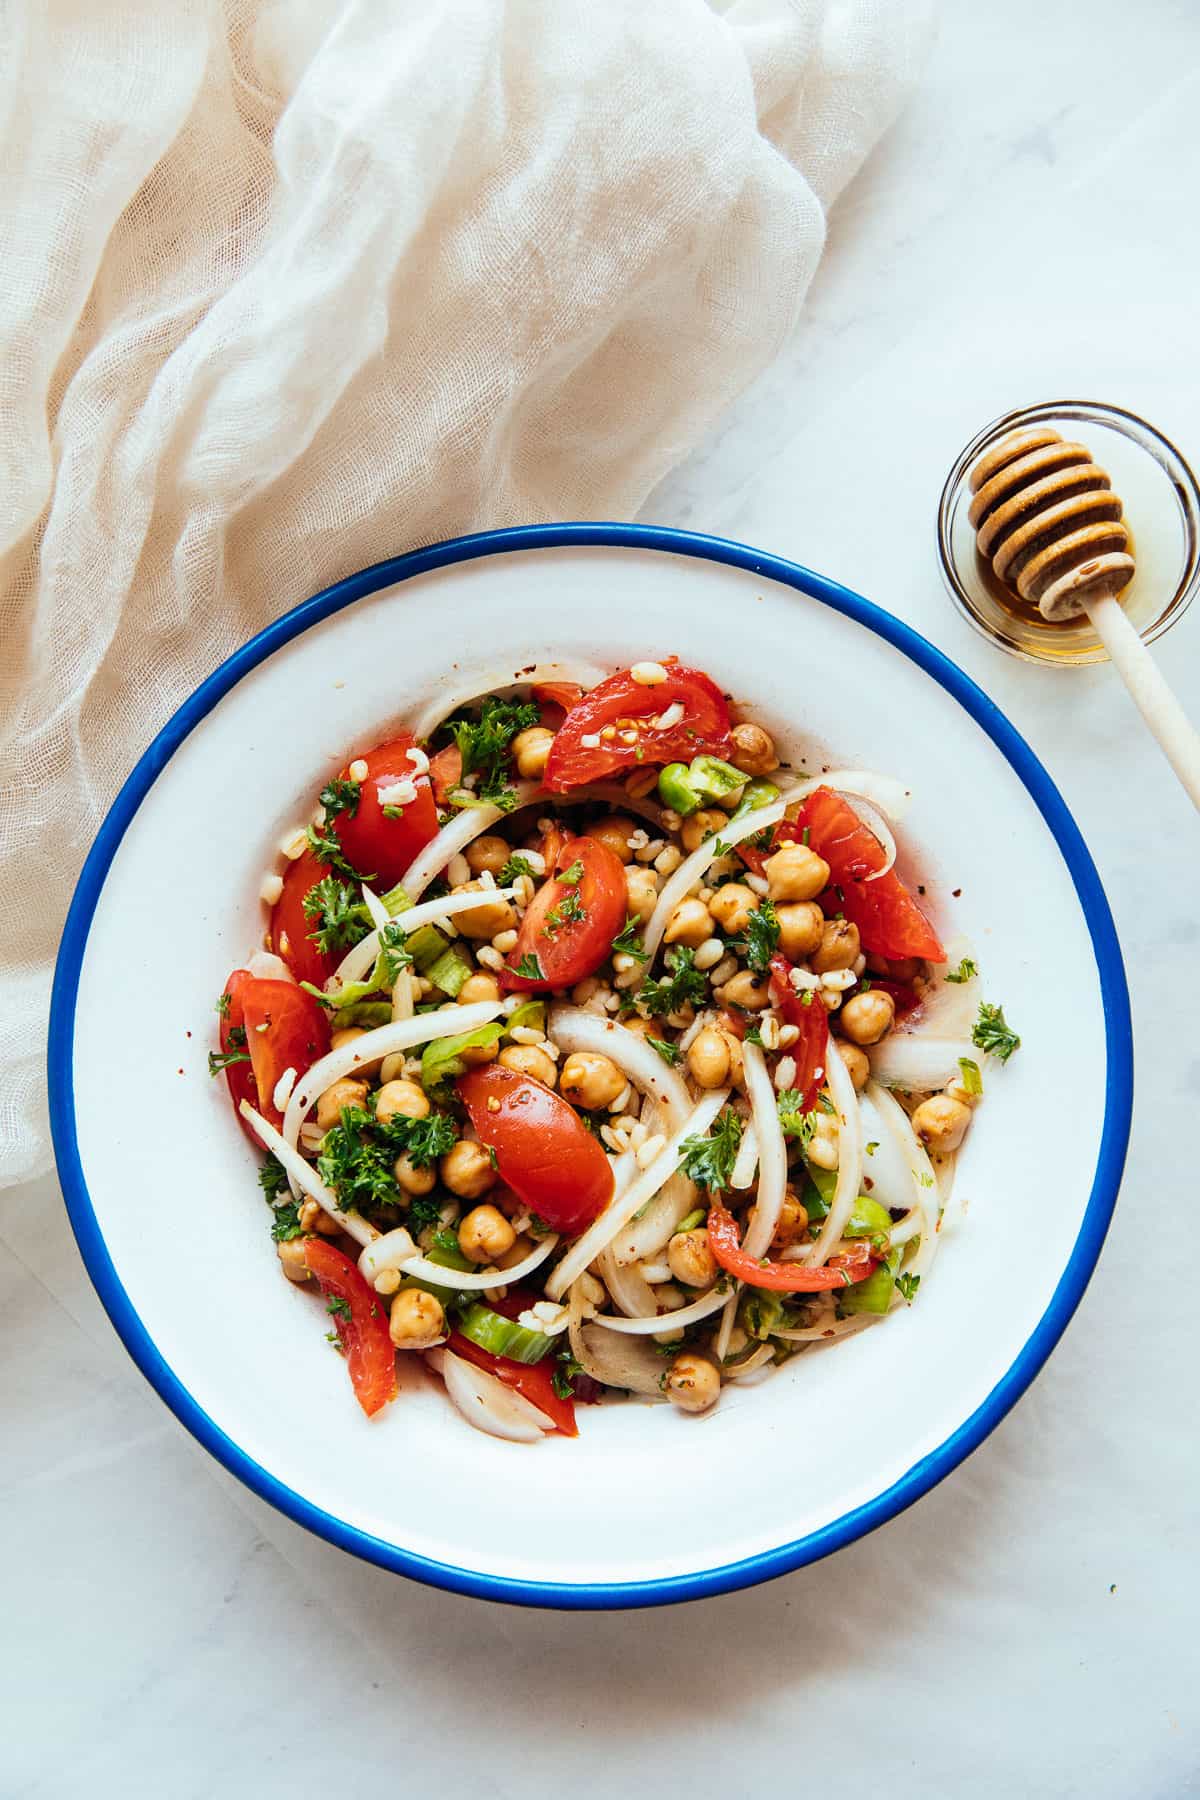 spicy chickpea and bulgur salad in a bowl with a blue rim